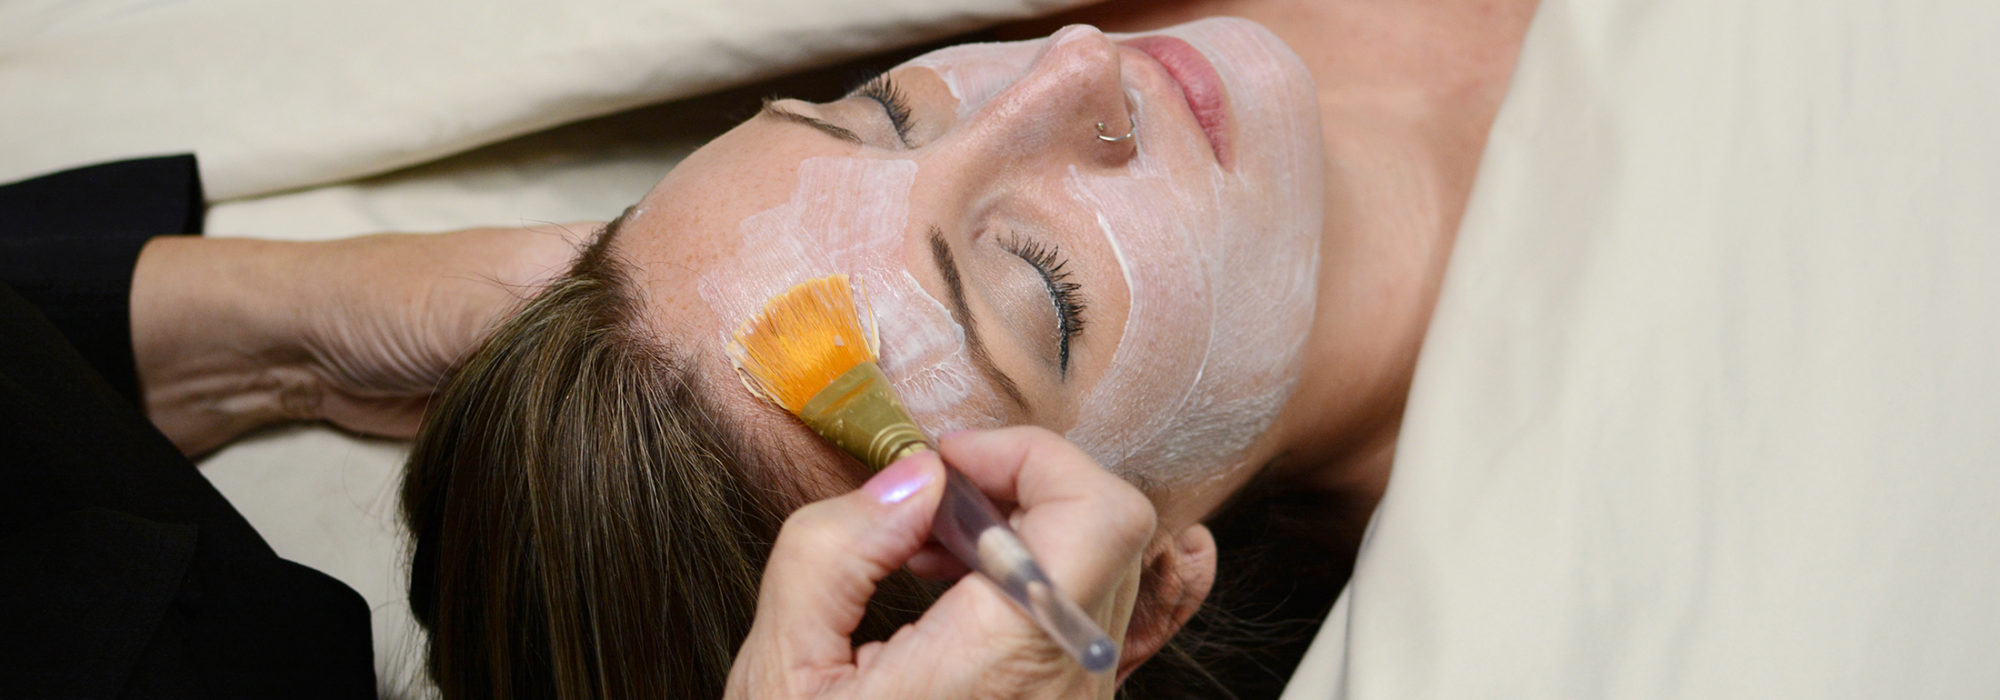 Afterglow Providence custom facial treatment.